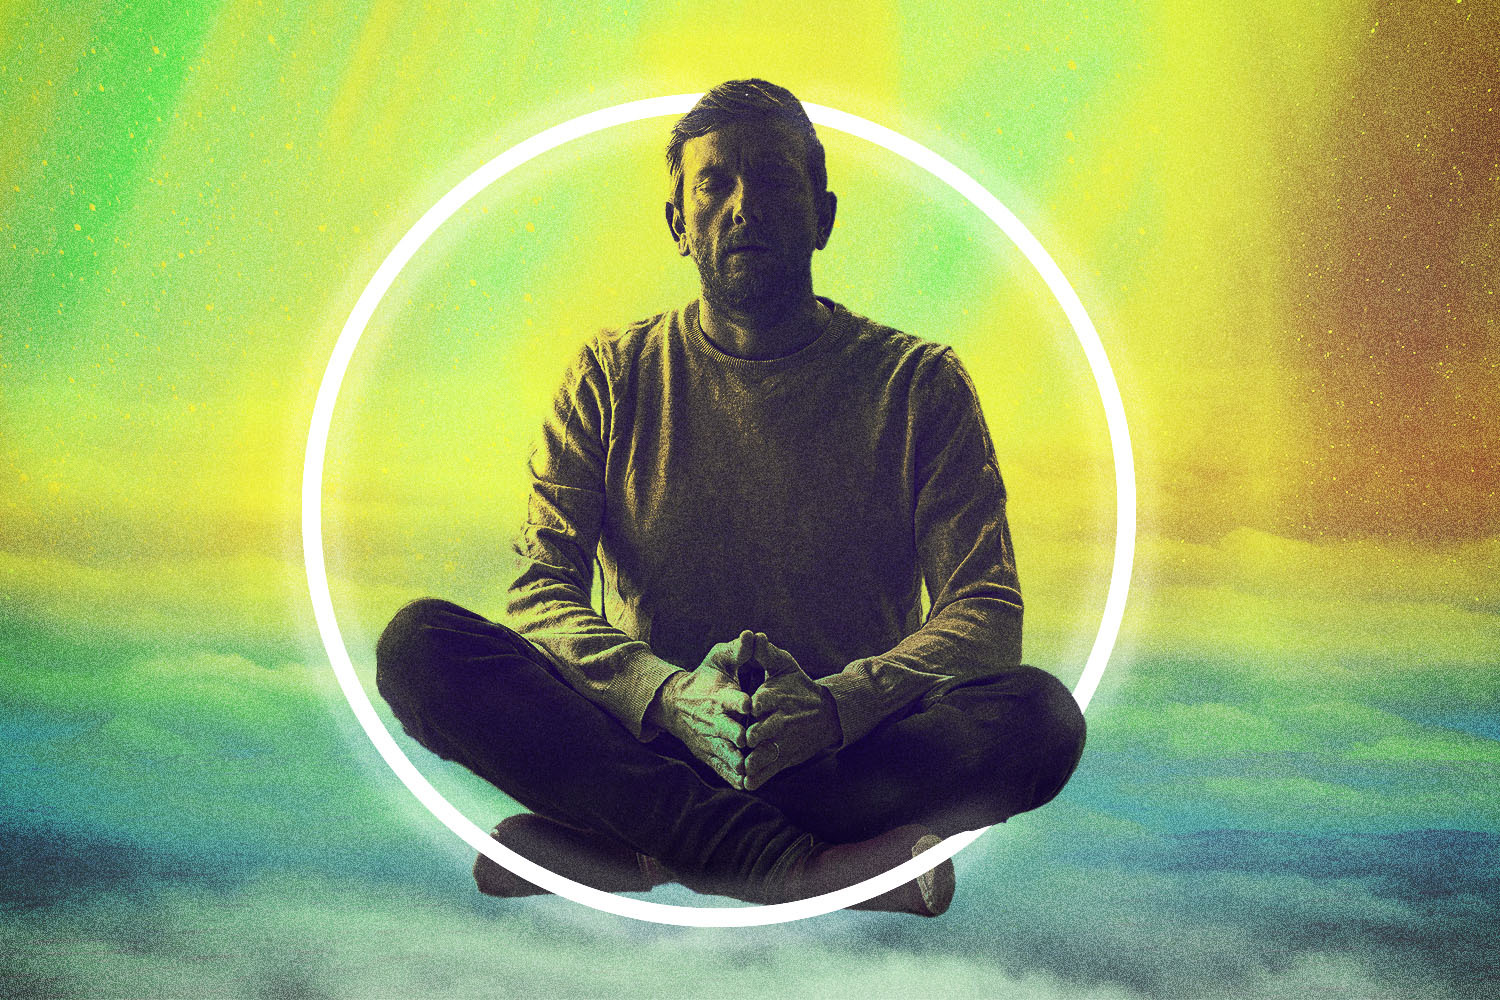 a man practicing transcendental meditation, which practitioners often say "changed their life"